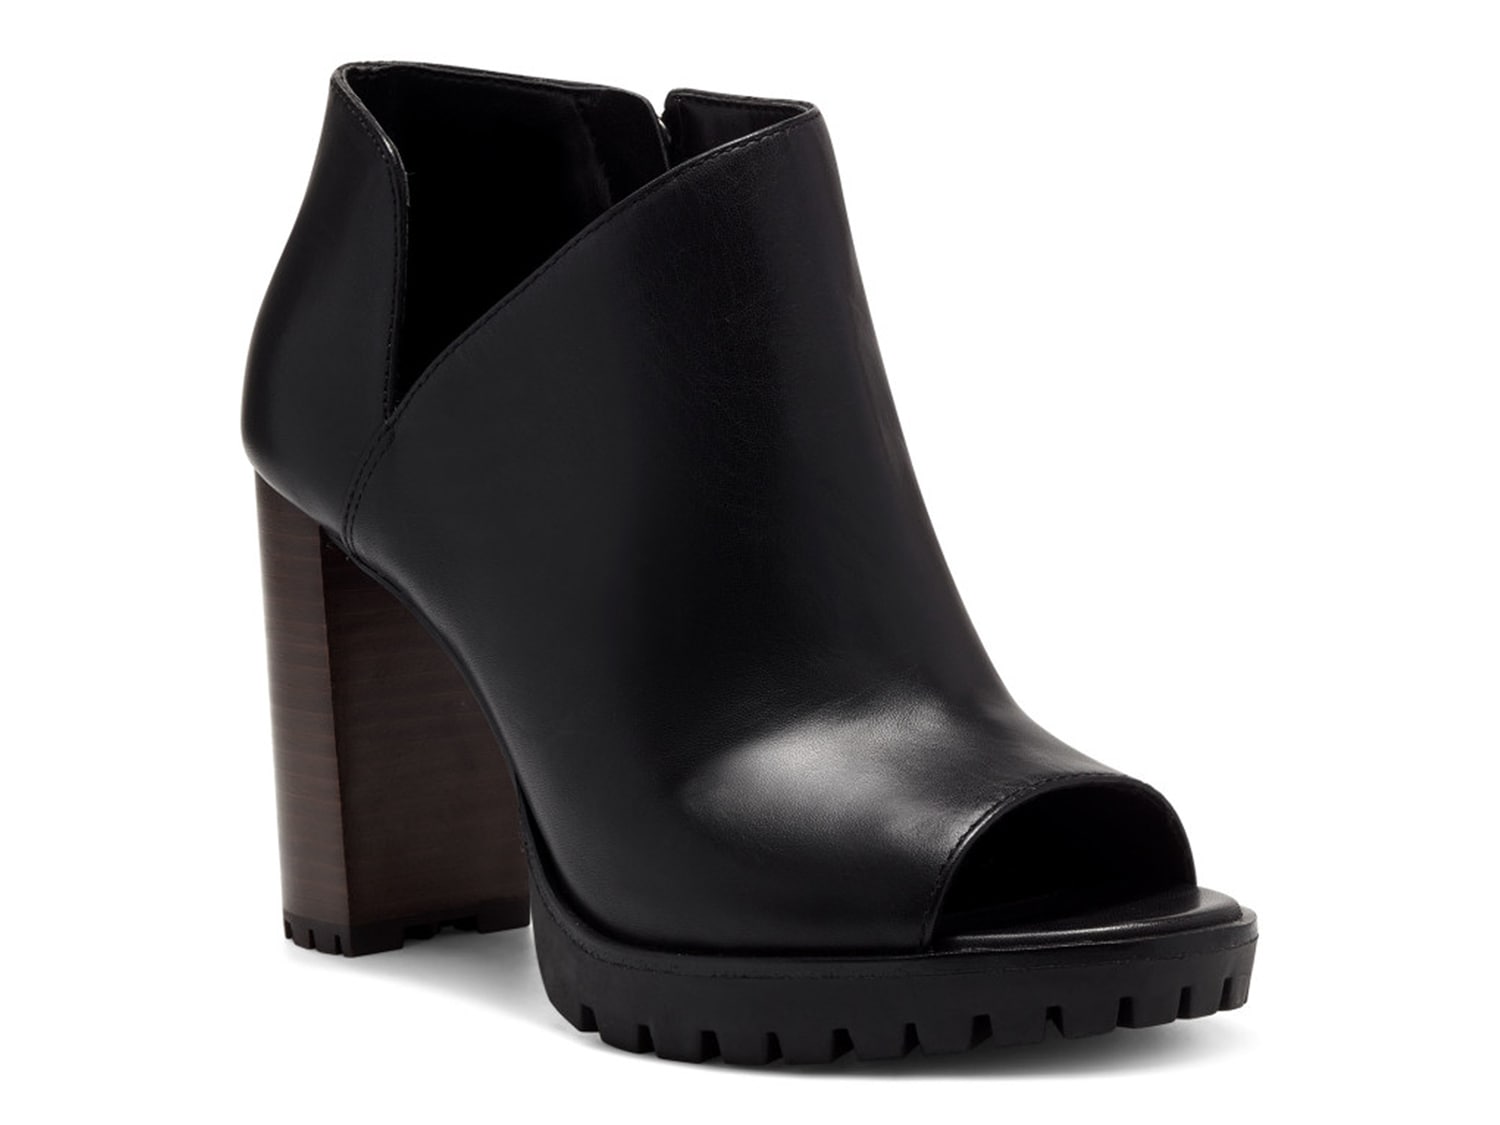 Vince Camuto Hevana Bootie - Free Shipping | DSW